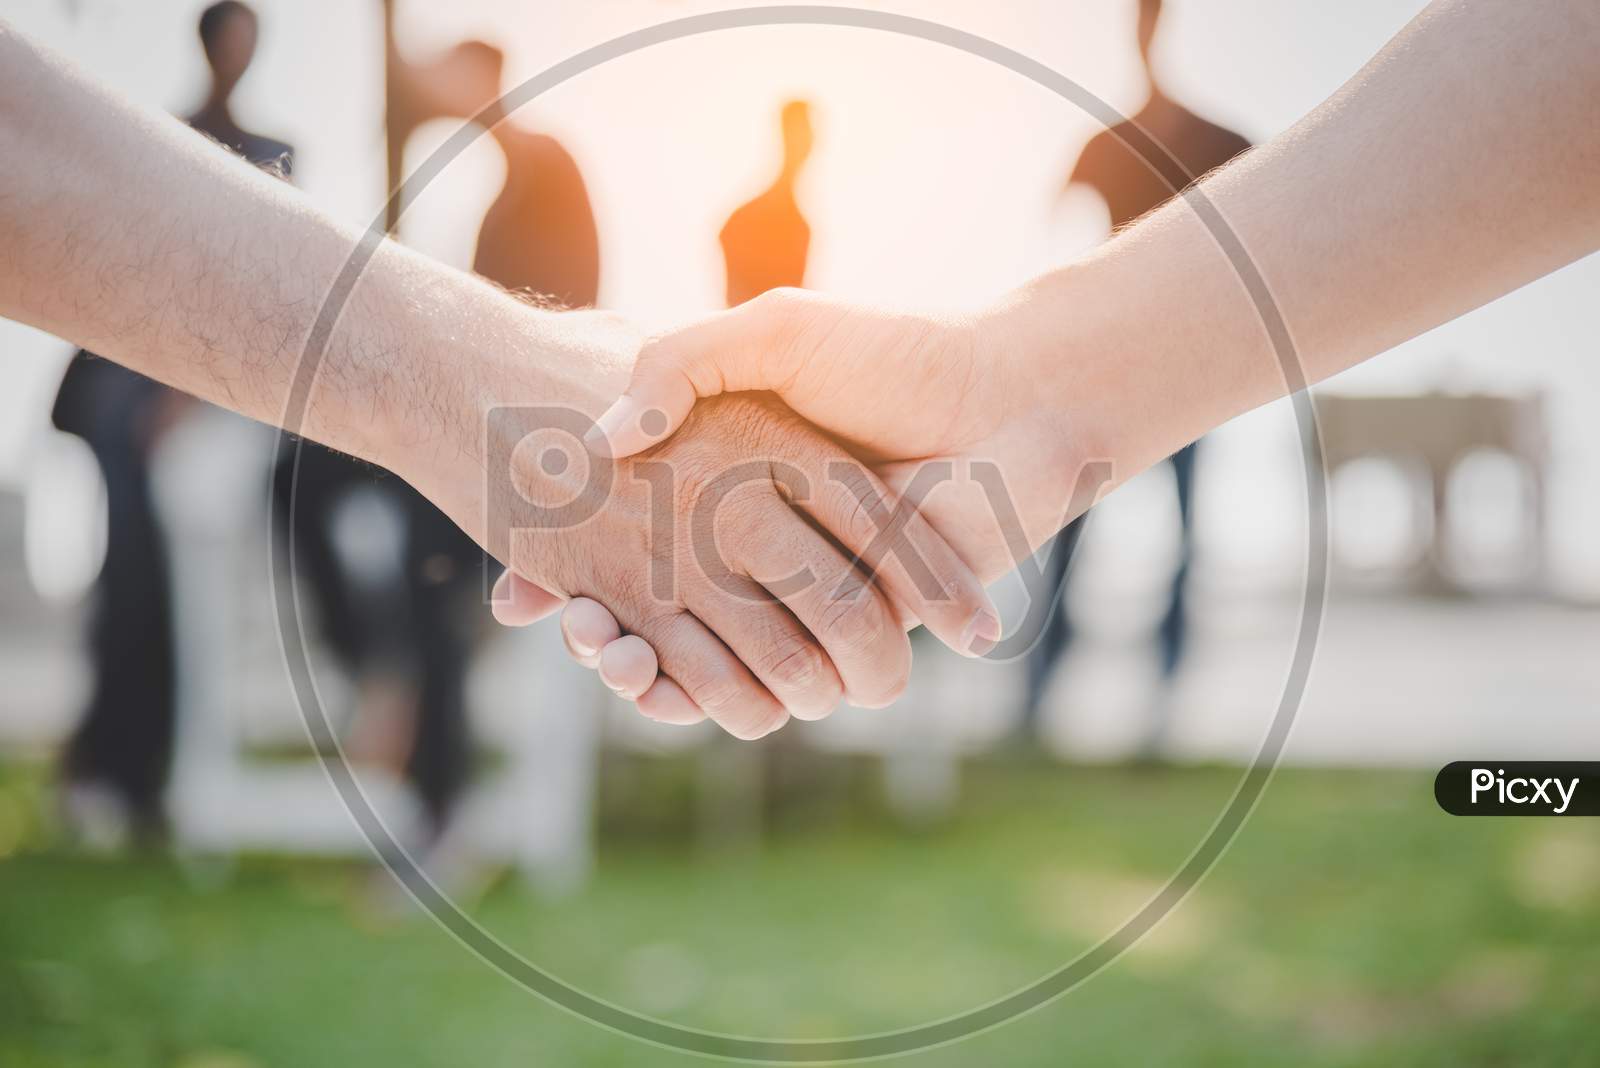 Handshake Of Two Business People At Outdoors. Business And Nature Concept. Meeting And Partnership Theme. Blurry People In Background Elements.